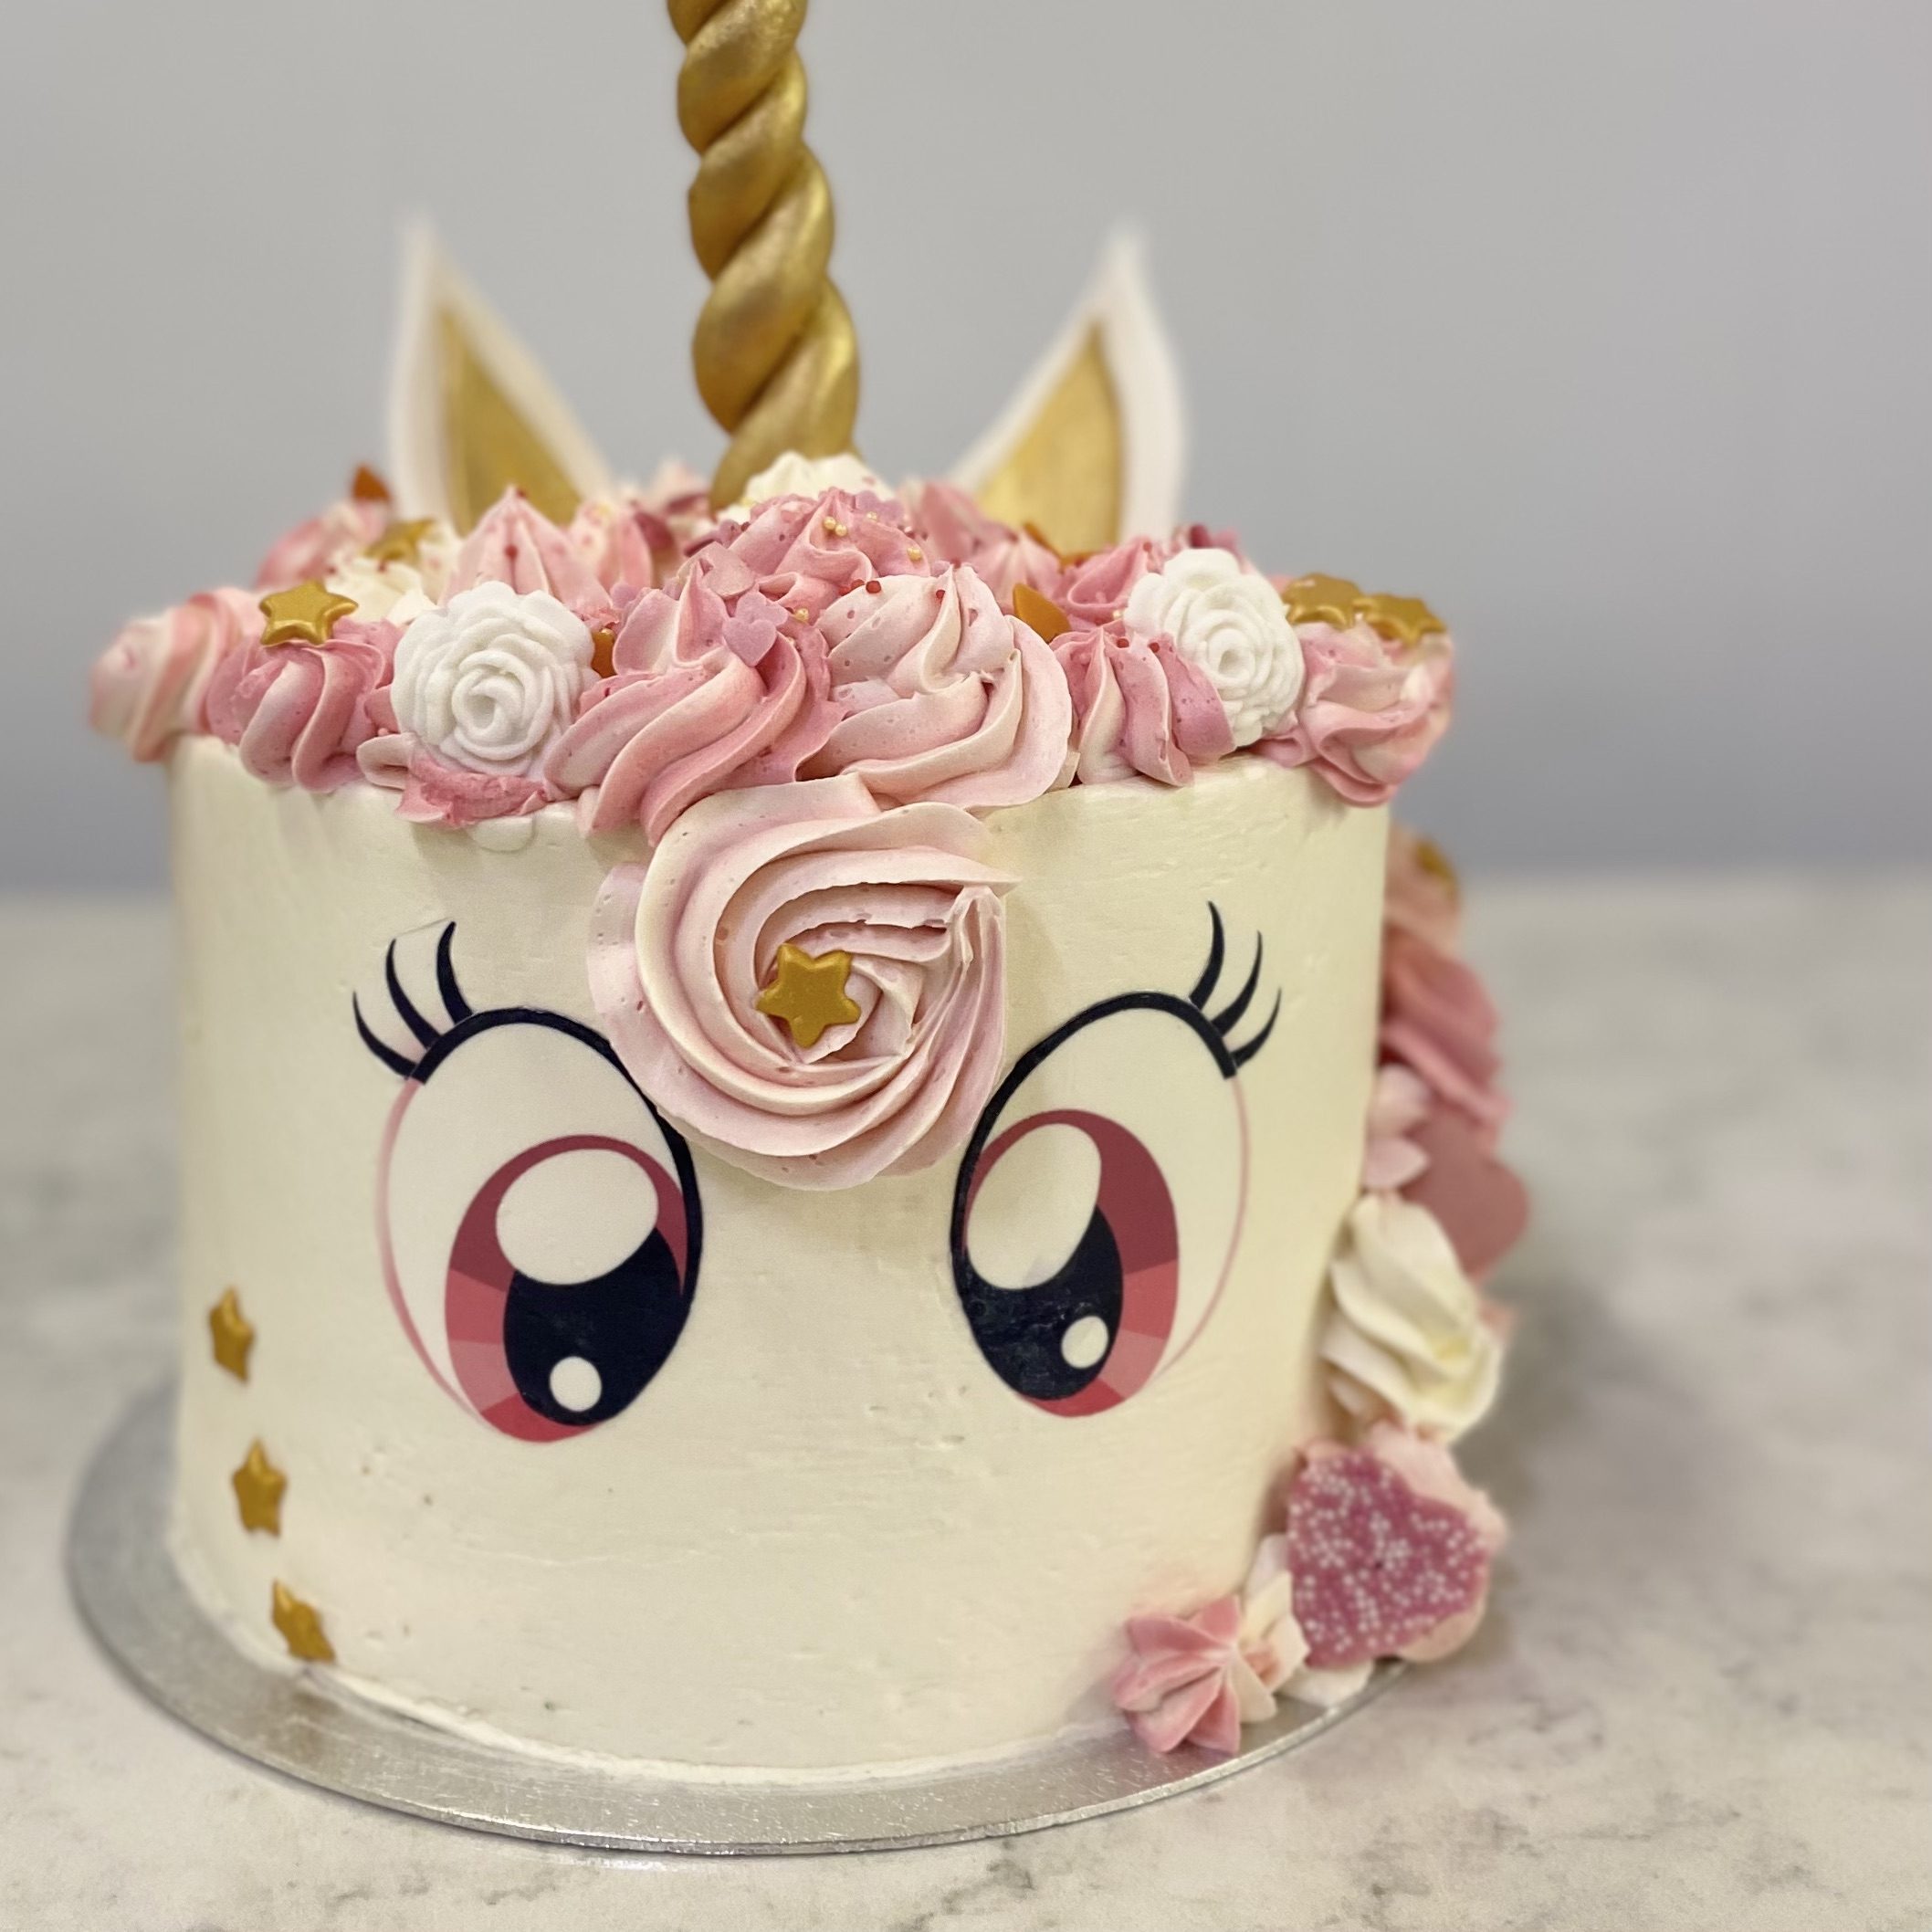 Rainbow Unicorn Cake Delivery Los Angeles-sonthuy.vn